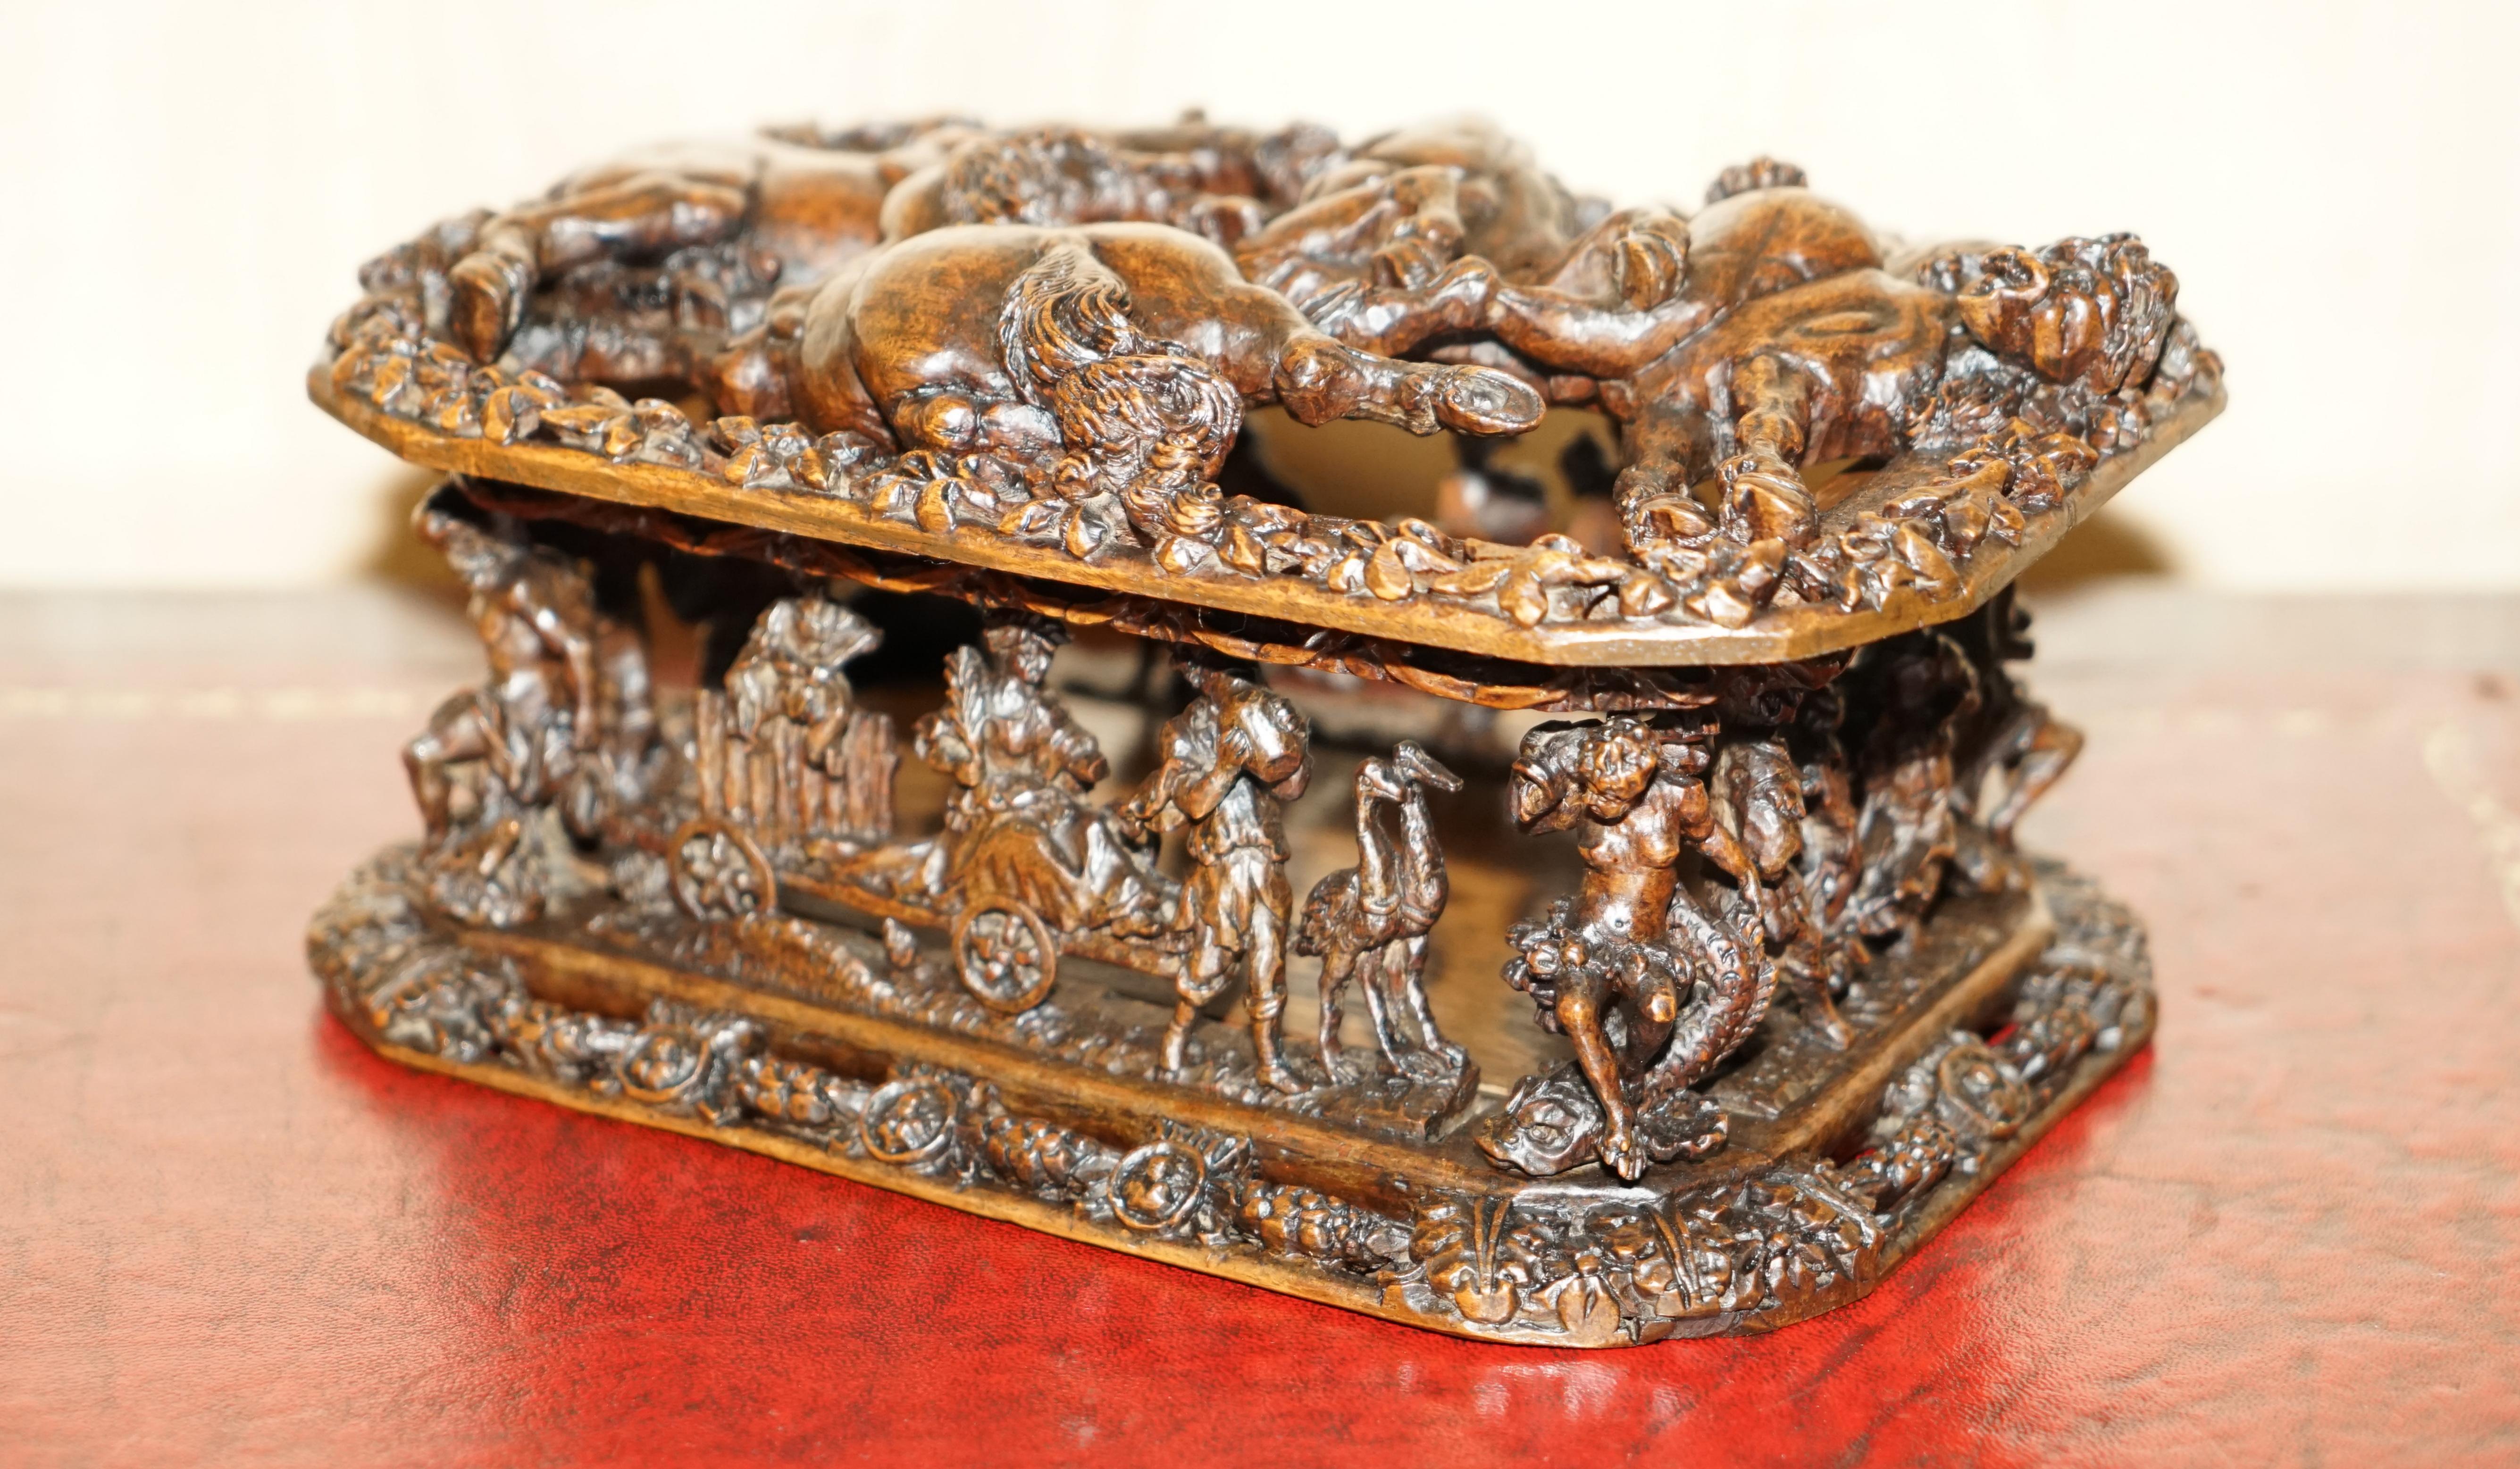 Royal House Antiques

Royal House Antiques is delighted to offer for sale this absolutely exquisite ornately hand carved Antique Italian box depicting stallion horses circa 1840

A very good looking and well made piece, it is hand carved all over